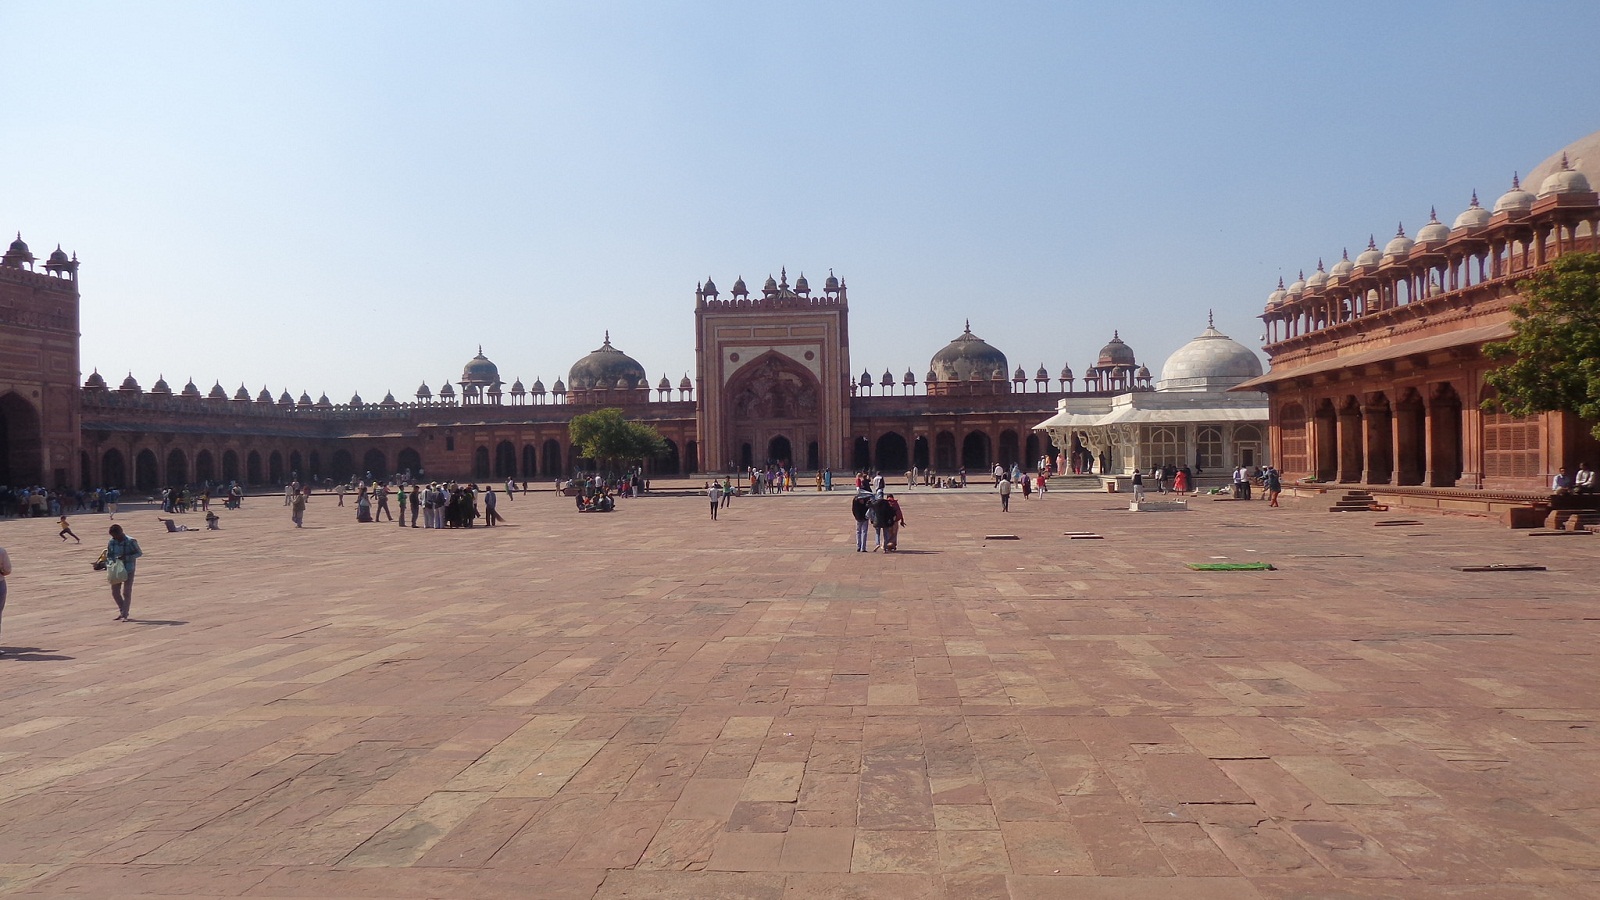 Fatehpur Sikri with Maharajas' Express